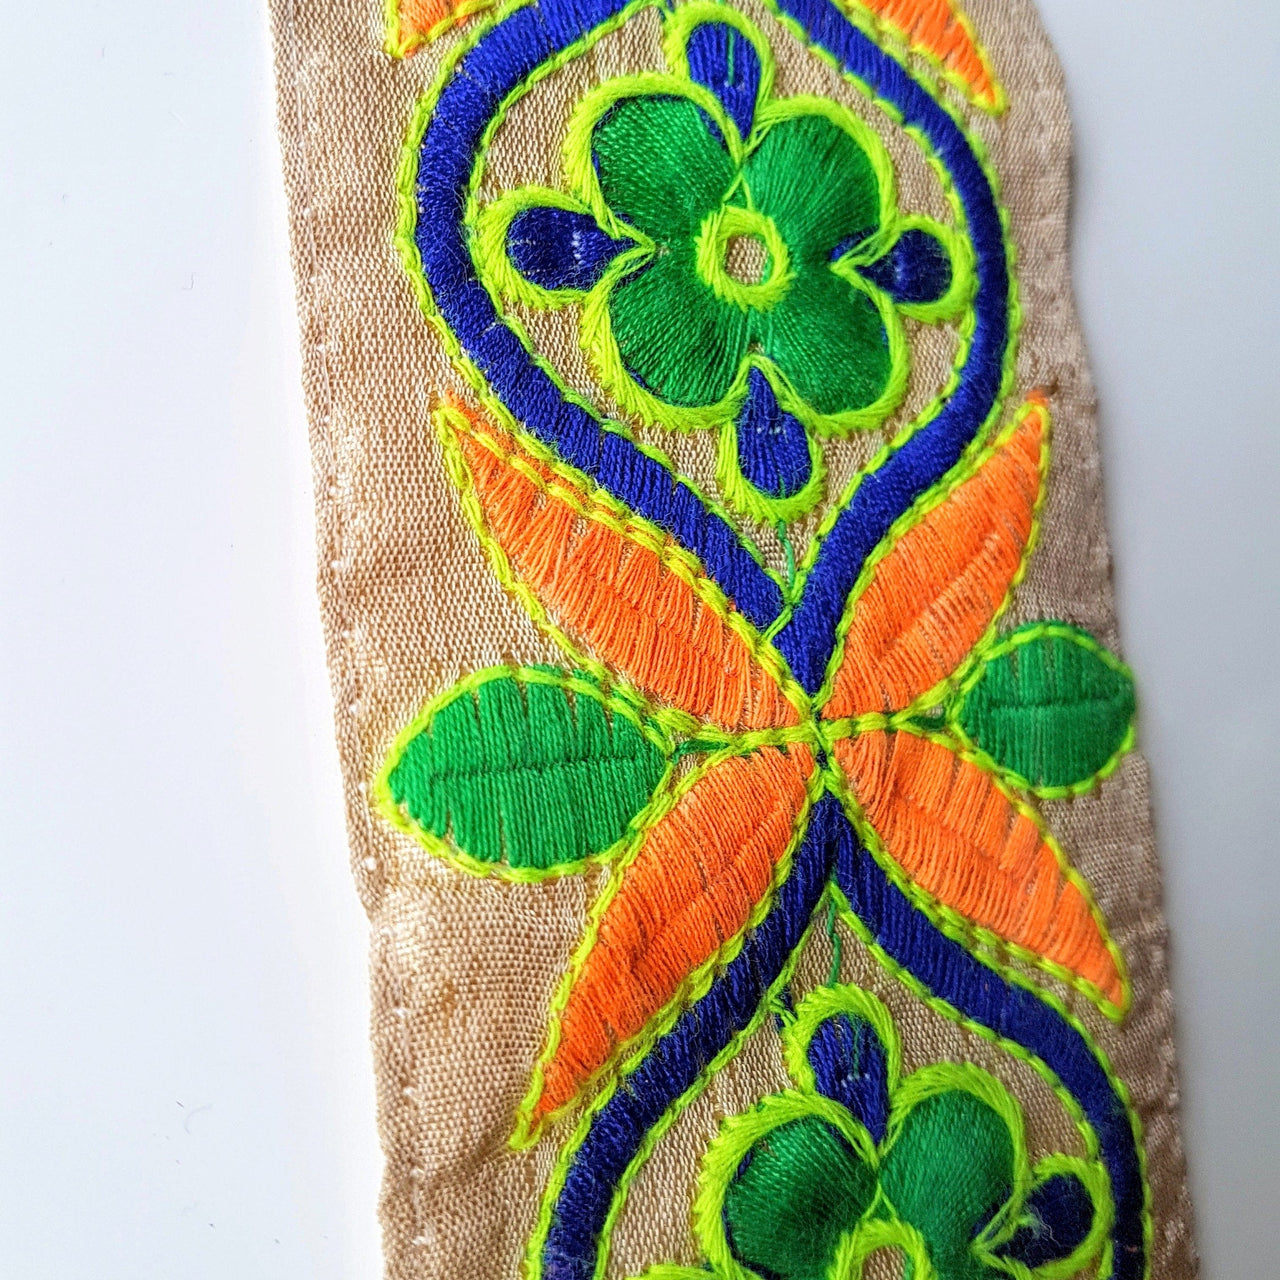 Beige Art Silk Fabric Trim With Orange, Green, Blue And Yellow Floral Embroidery